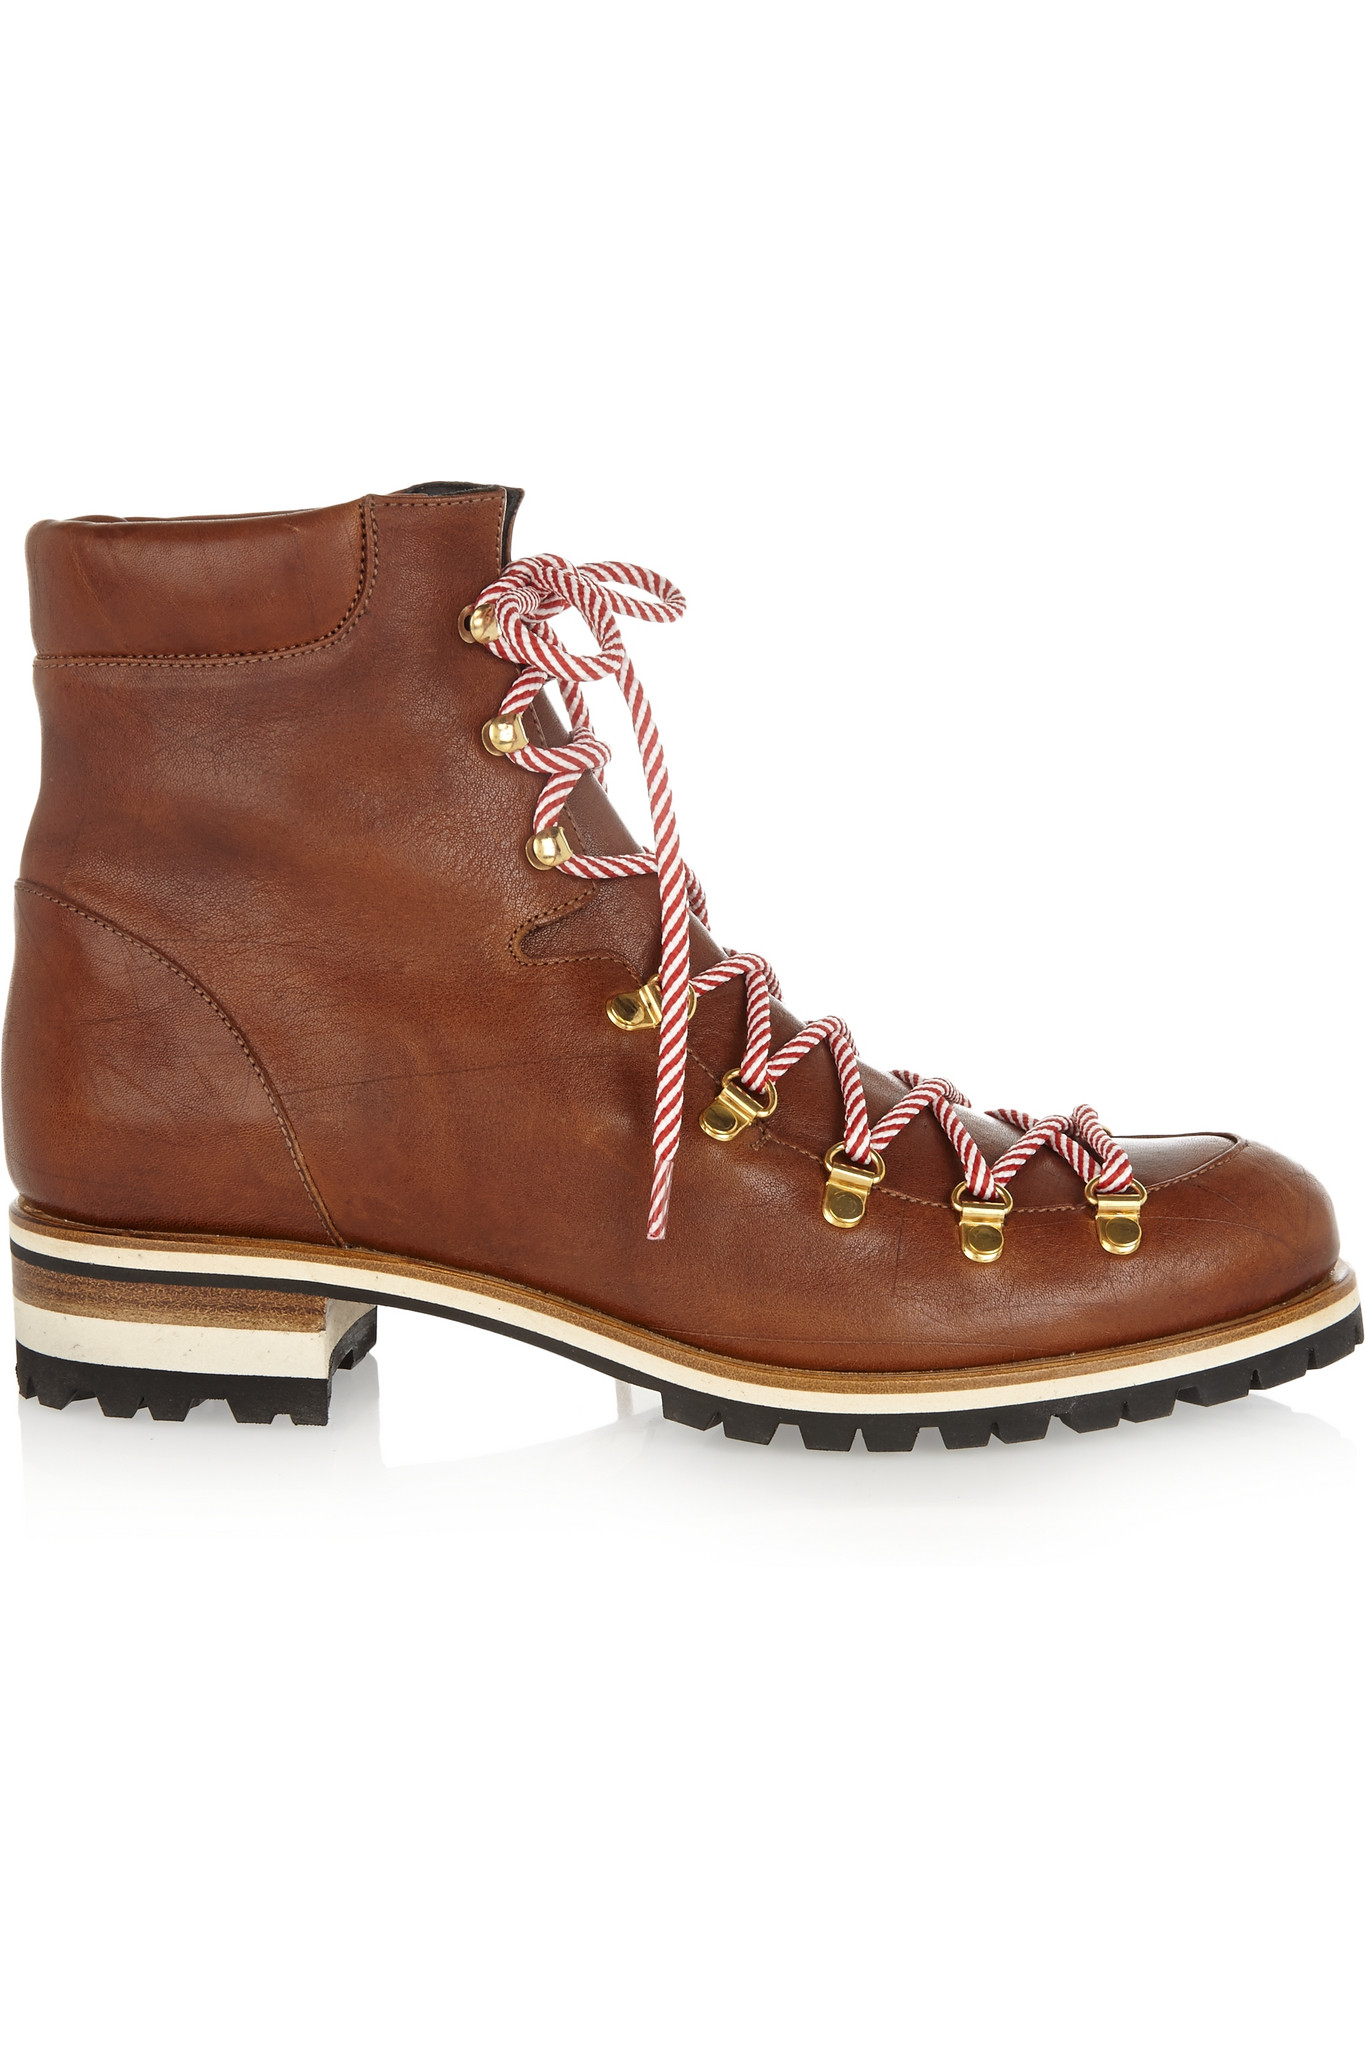 Rupert Sanderson Hamilton Leather Boots in Tan (Brown) - Lyst